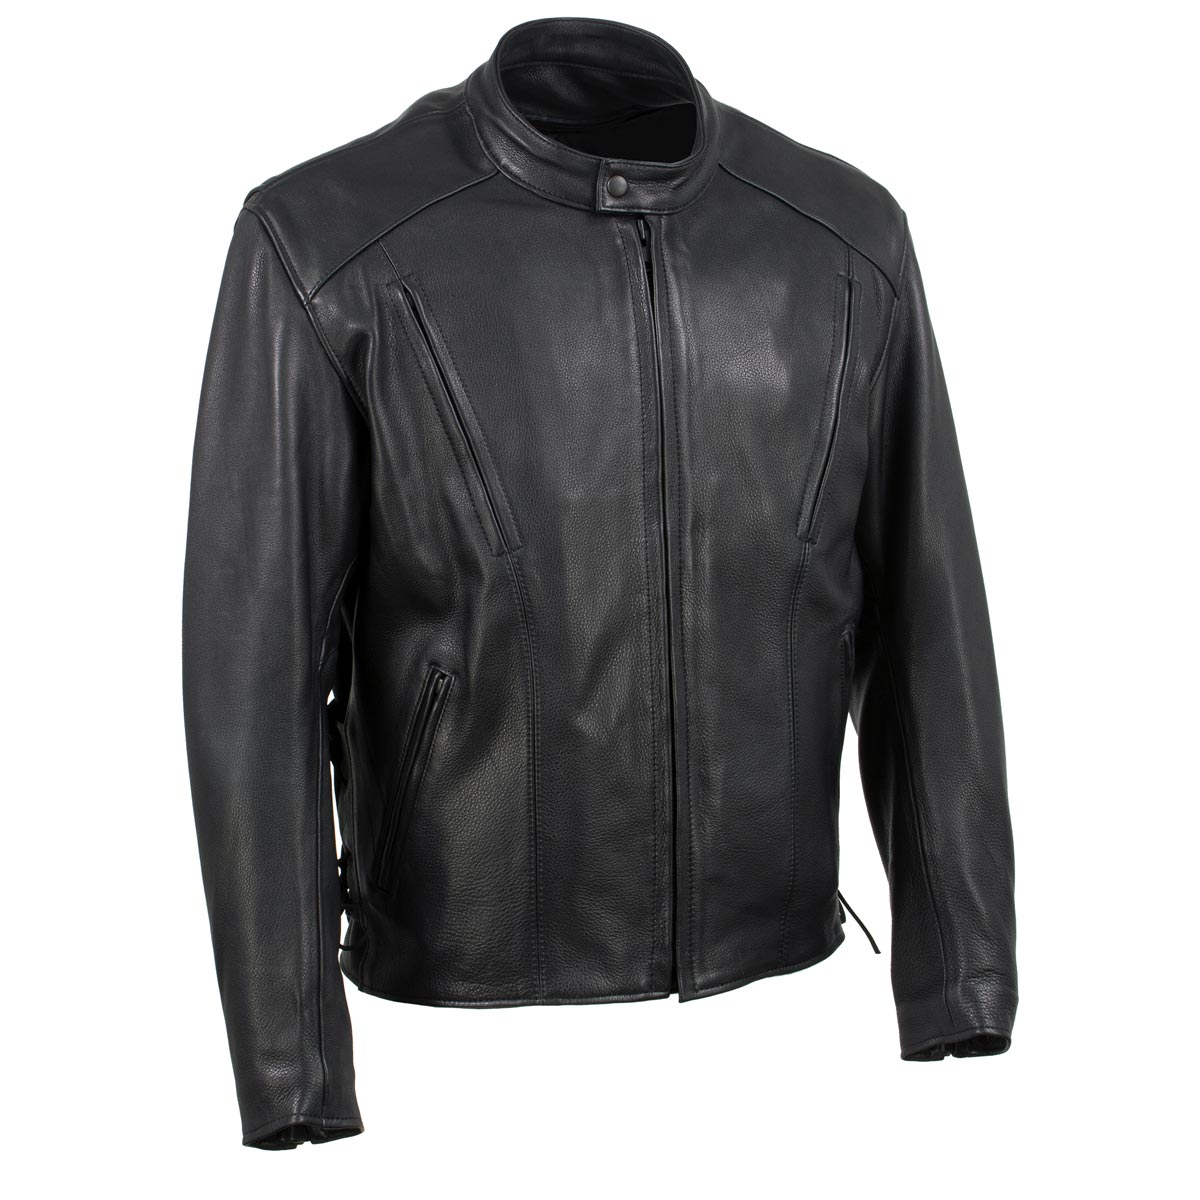 Hot Leathers JKM5002 USA Made Men's 'Air Stream' Vented Black Premium Leather MC Jacket with Side Laces